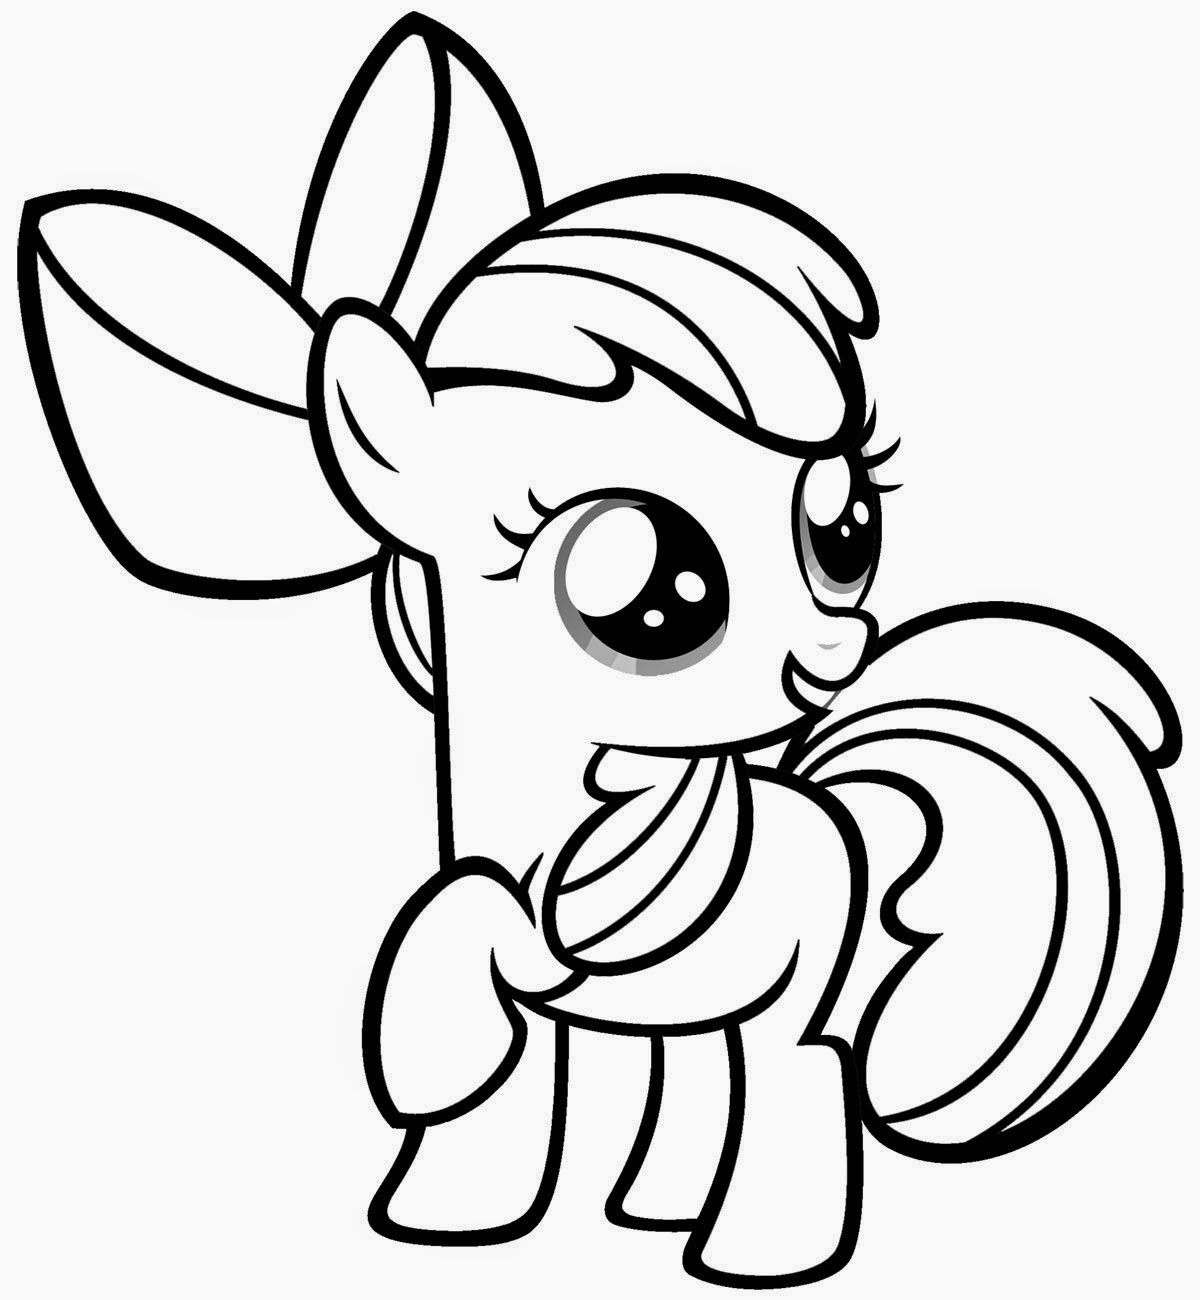 Download Coloring Pages: My Little Pony Coloring Pages Free and ...